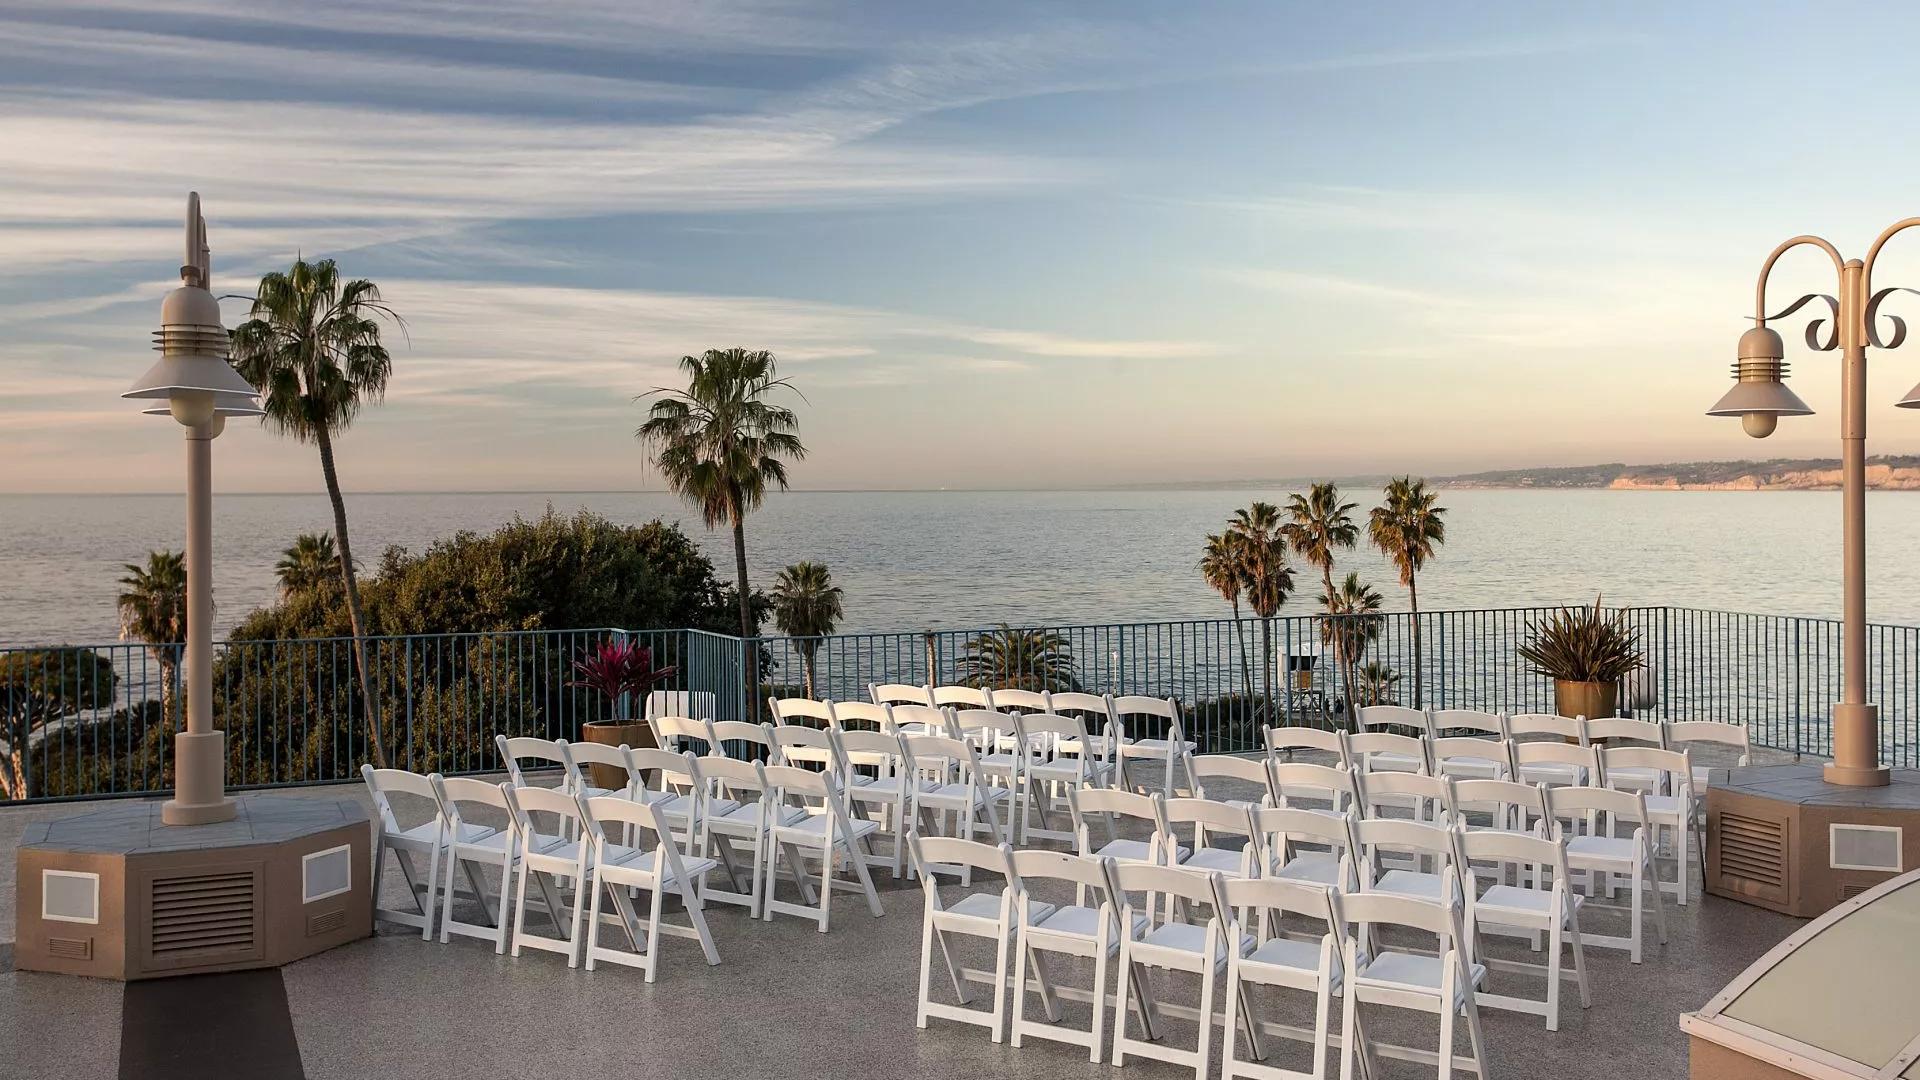 The 16 Best Outdoor Wedding Venues for Rent in San Diego, CA